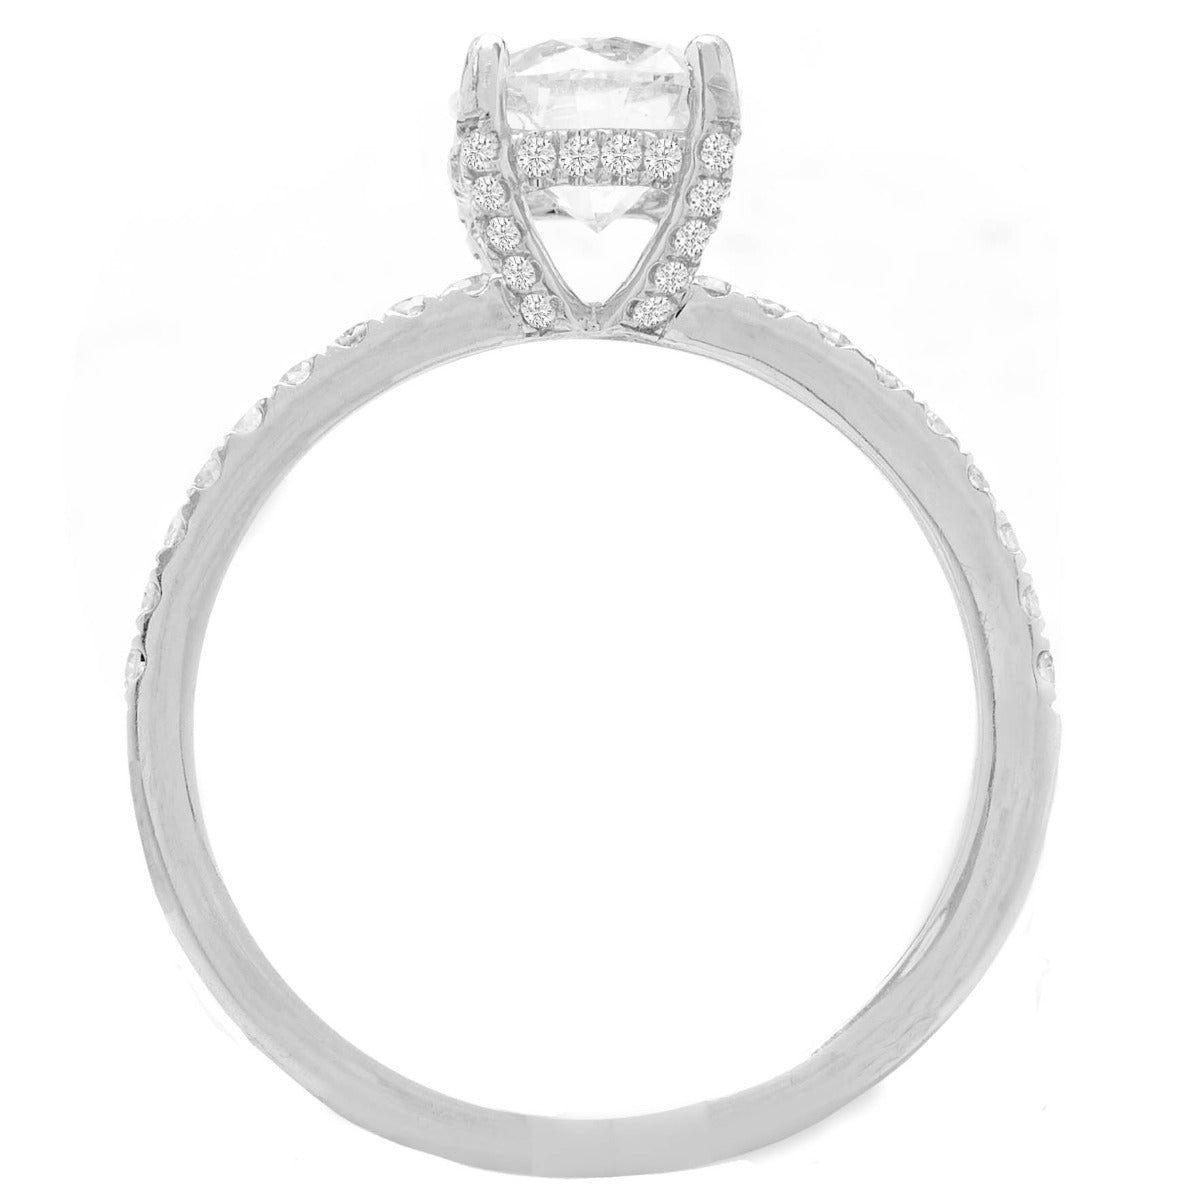 Remily Hidden Halo Diamond Engagement Ring in 14K White Gold; .26 ctw